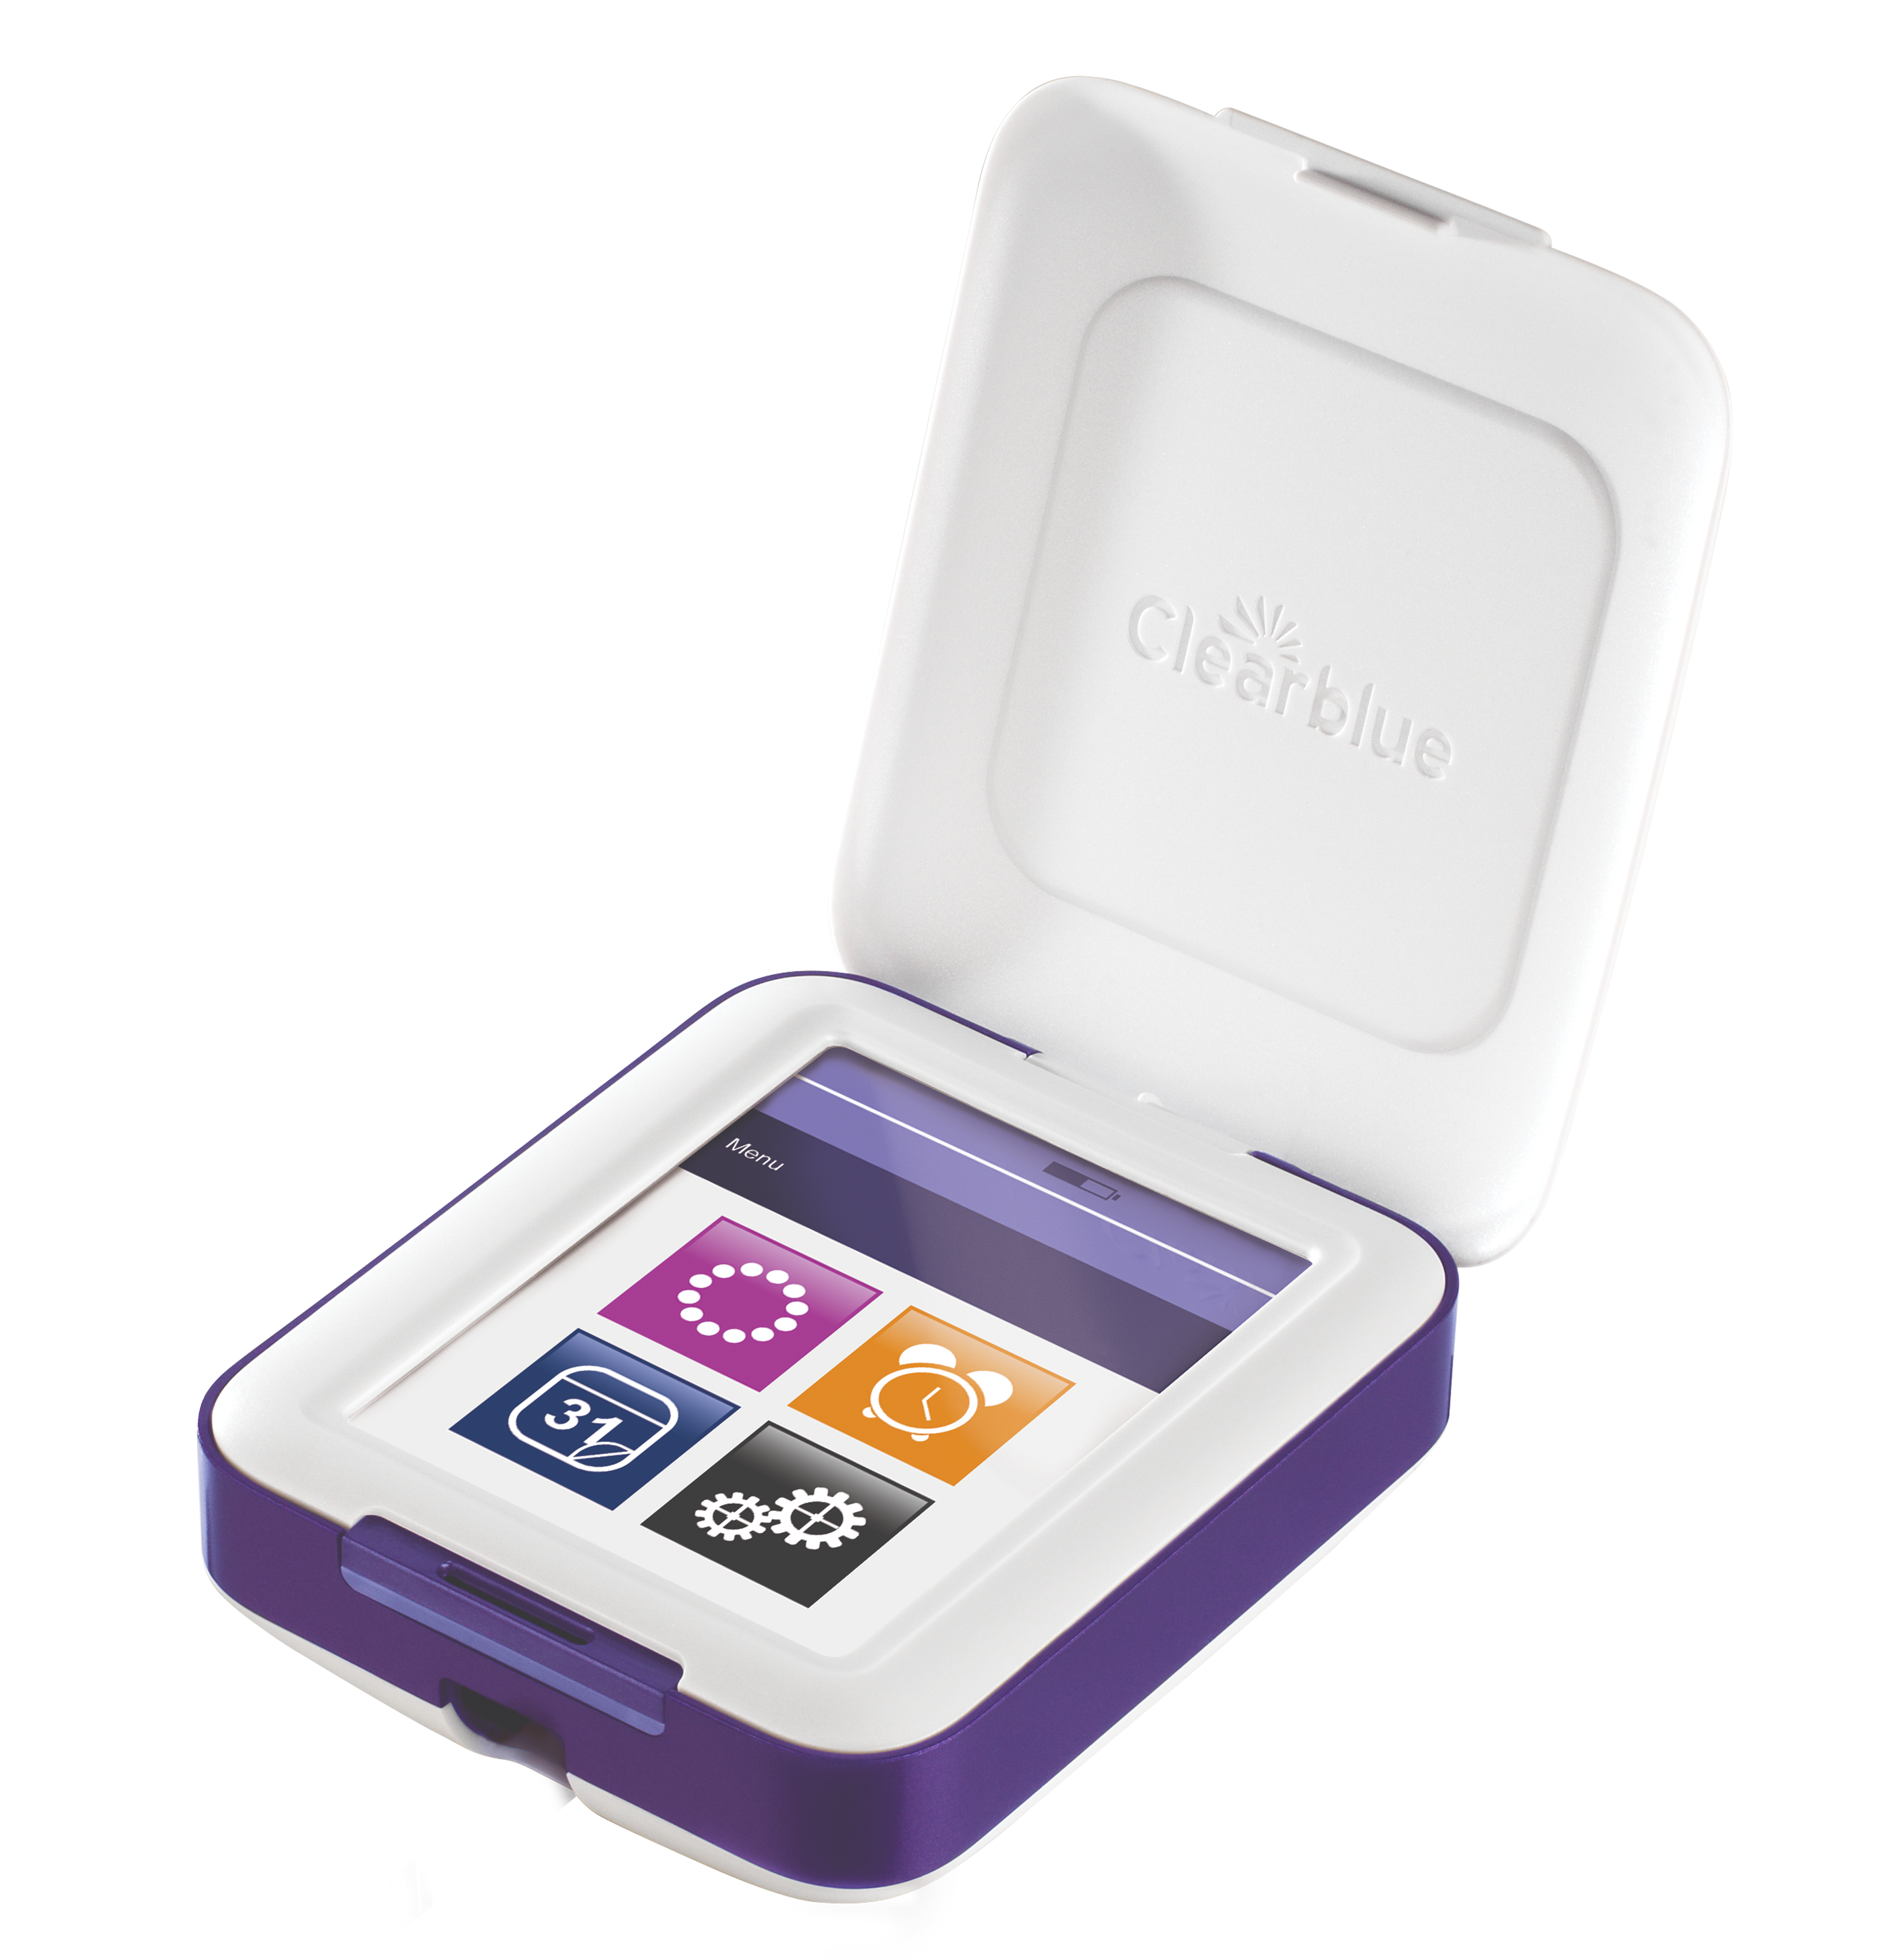 Clearblue® Advanced Fertility Monitor